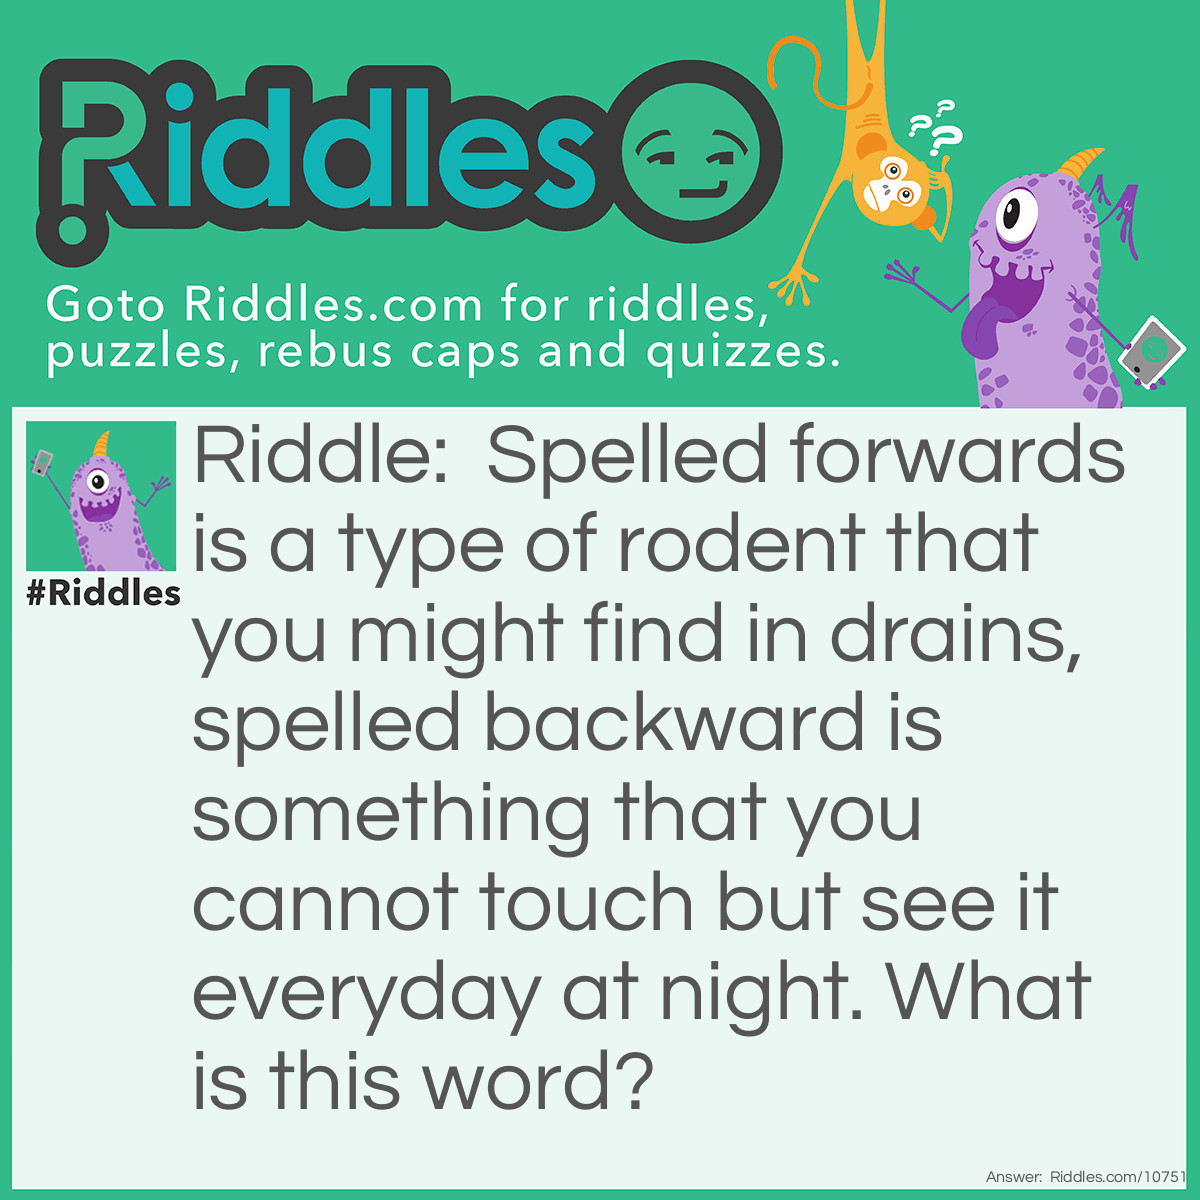 Riddle: Spelled forwards is a type of rodent that you might find in drains, spelled backward is something that you cannot touch but see it everyday at night. What is this word? Answer: Rats, star.